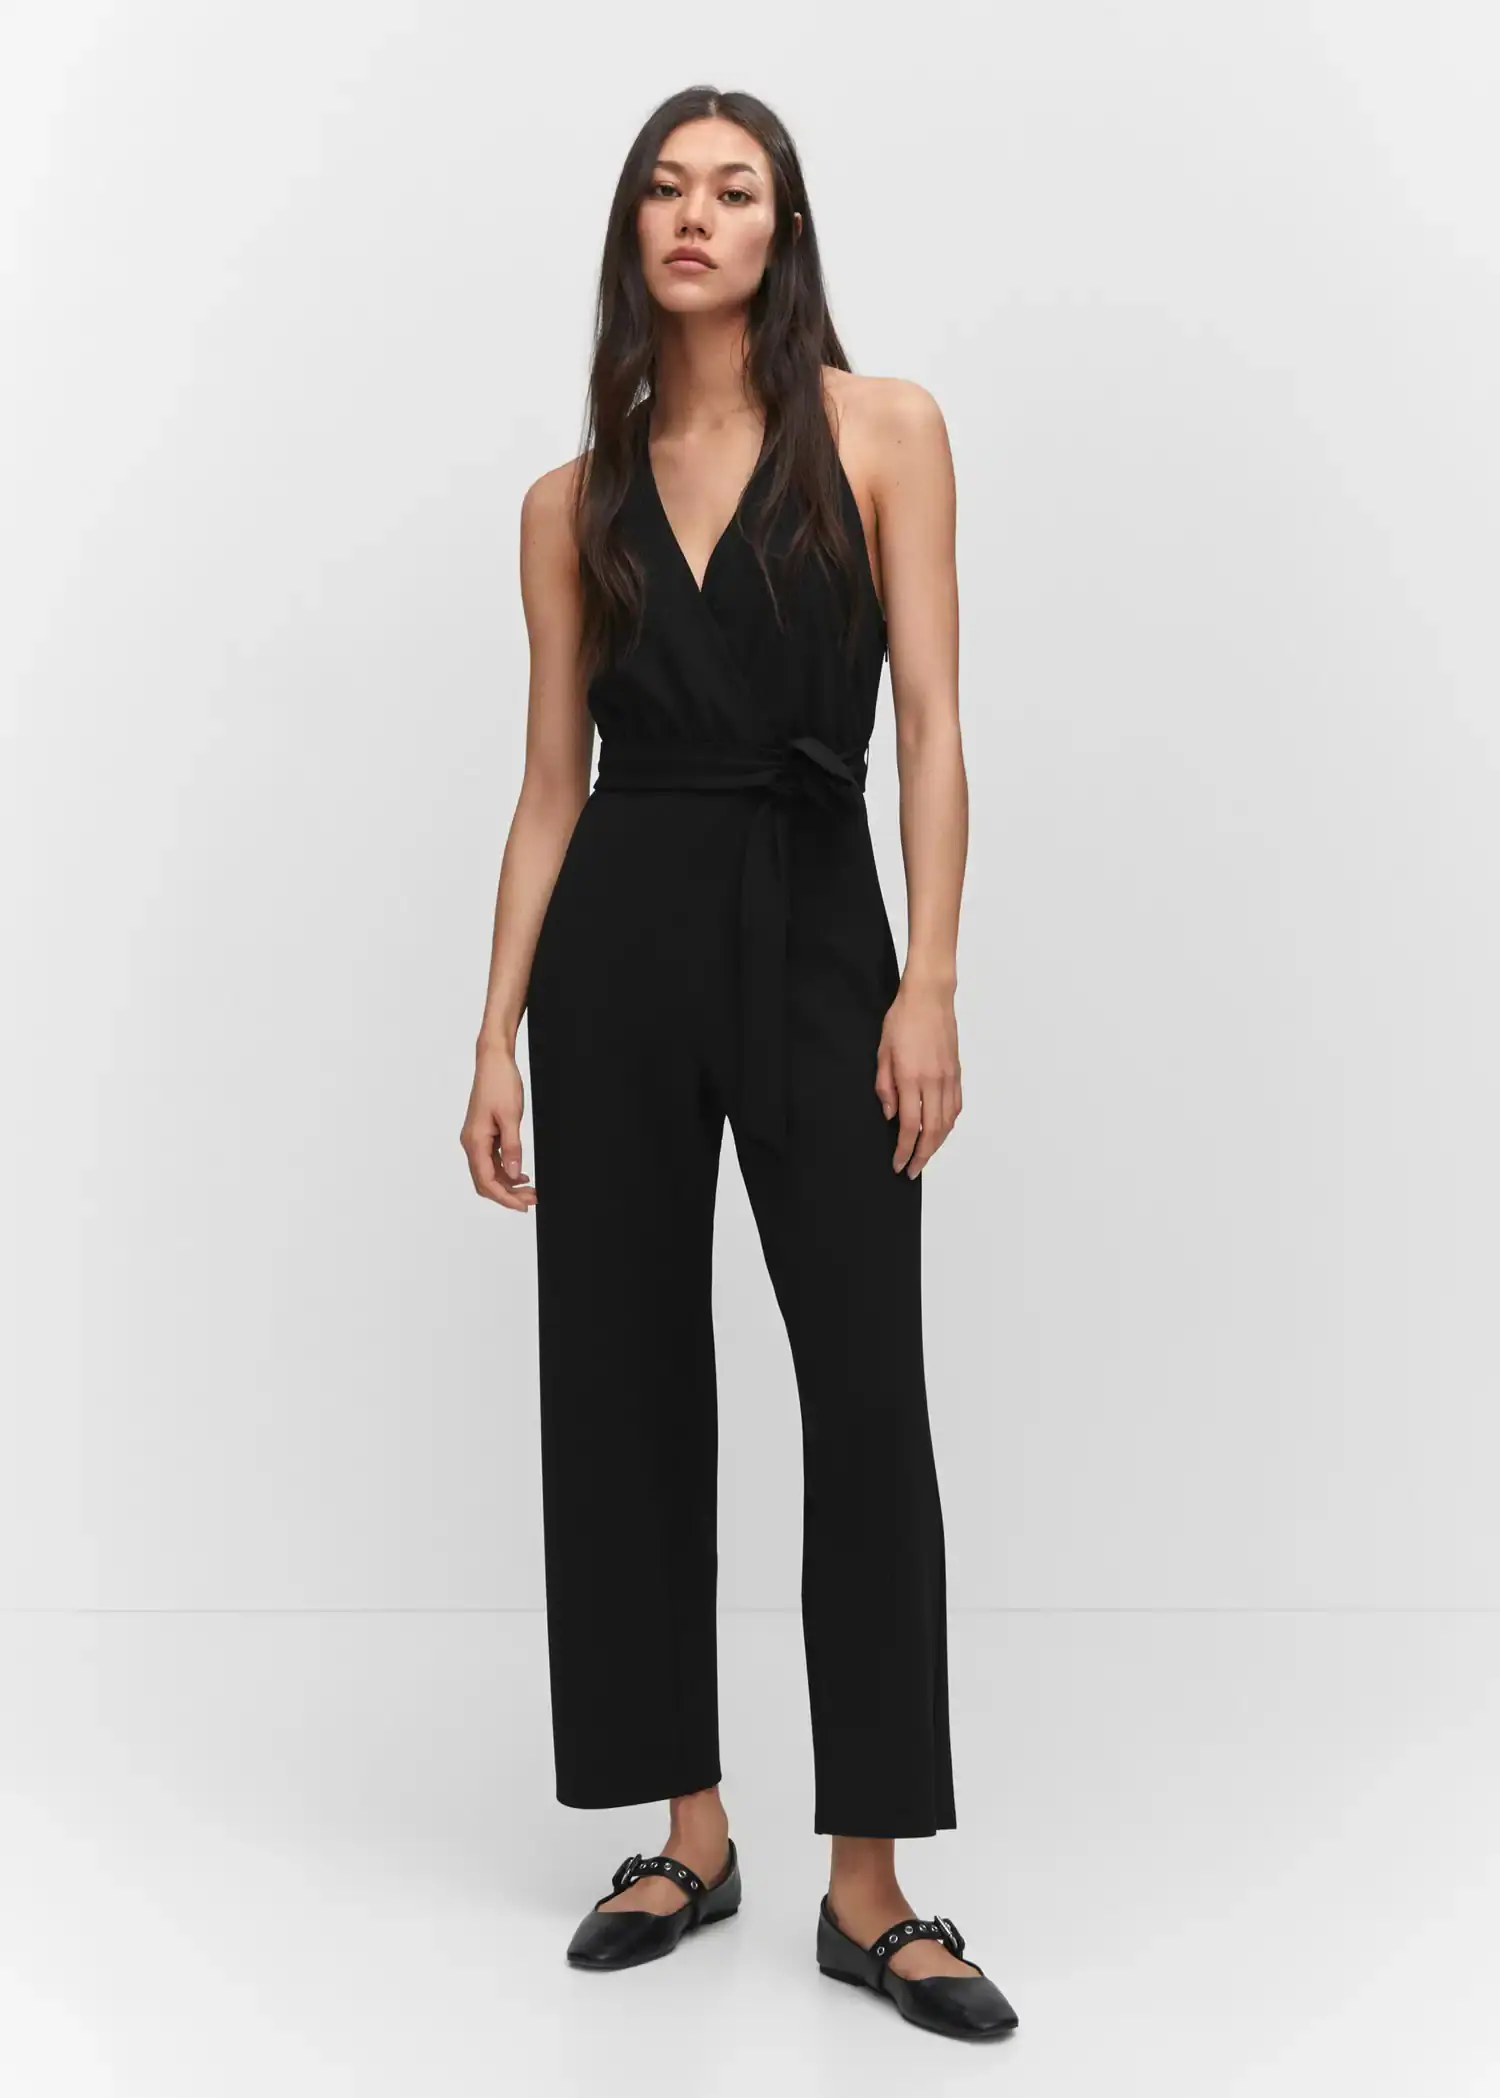 Mango Halter jumpsuit with bow detail. 3